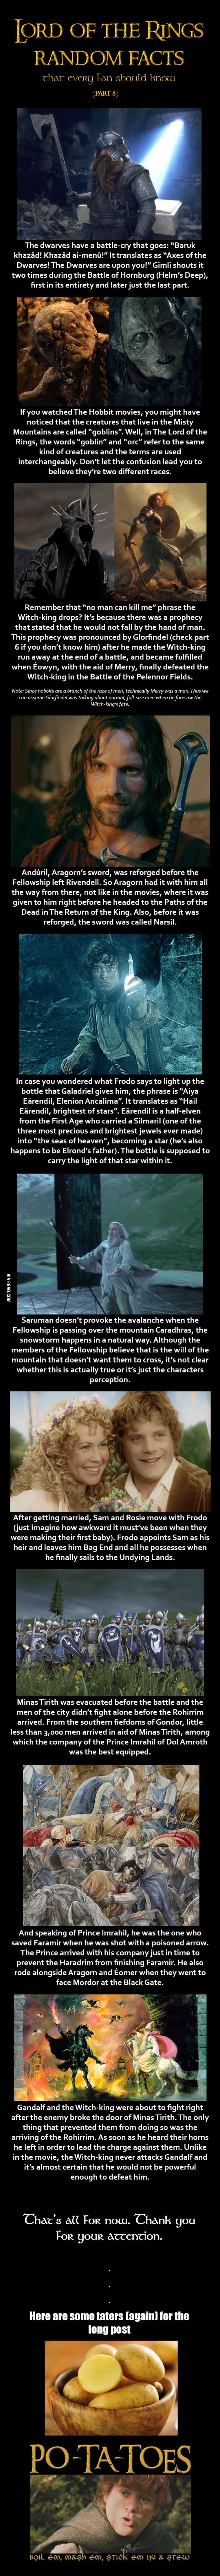 Lord of the Rings Random Facts Part 8